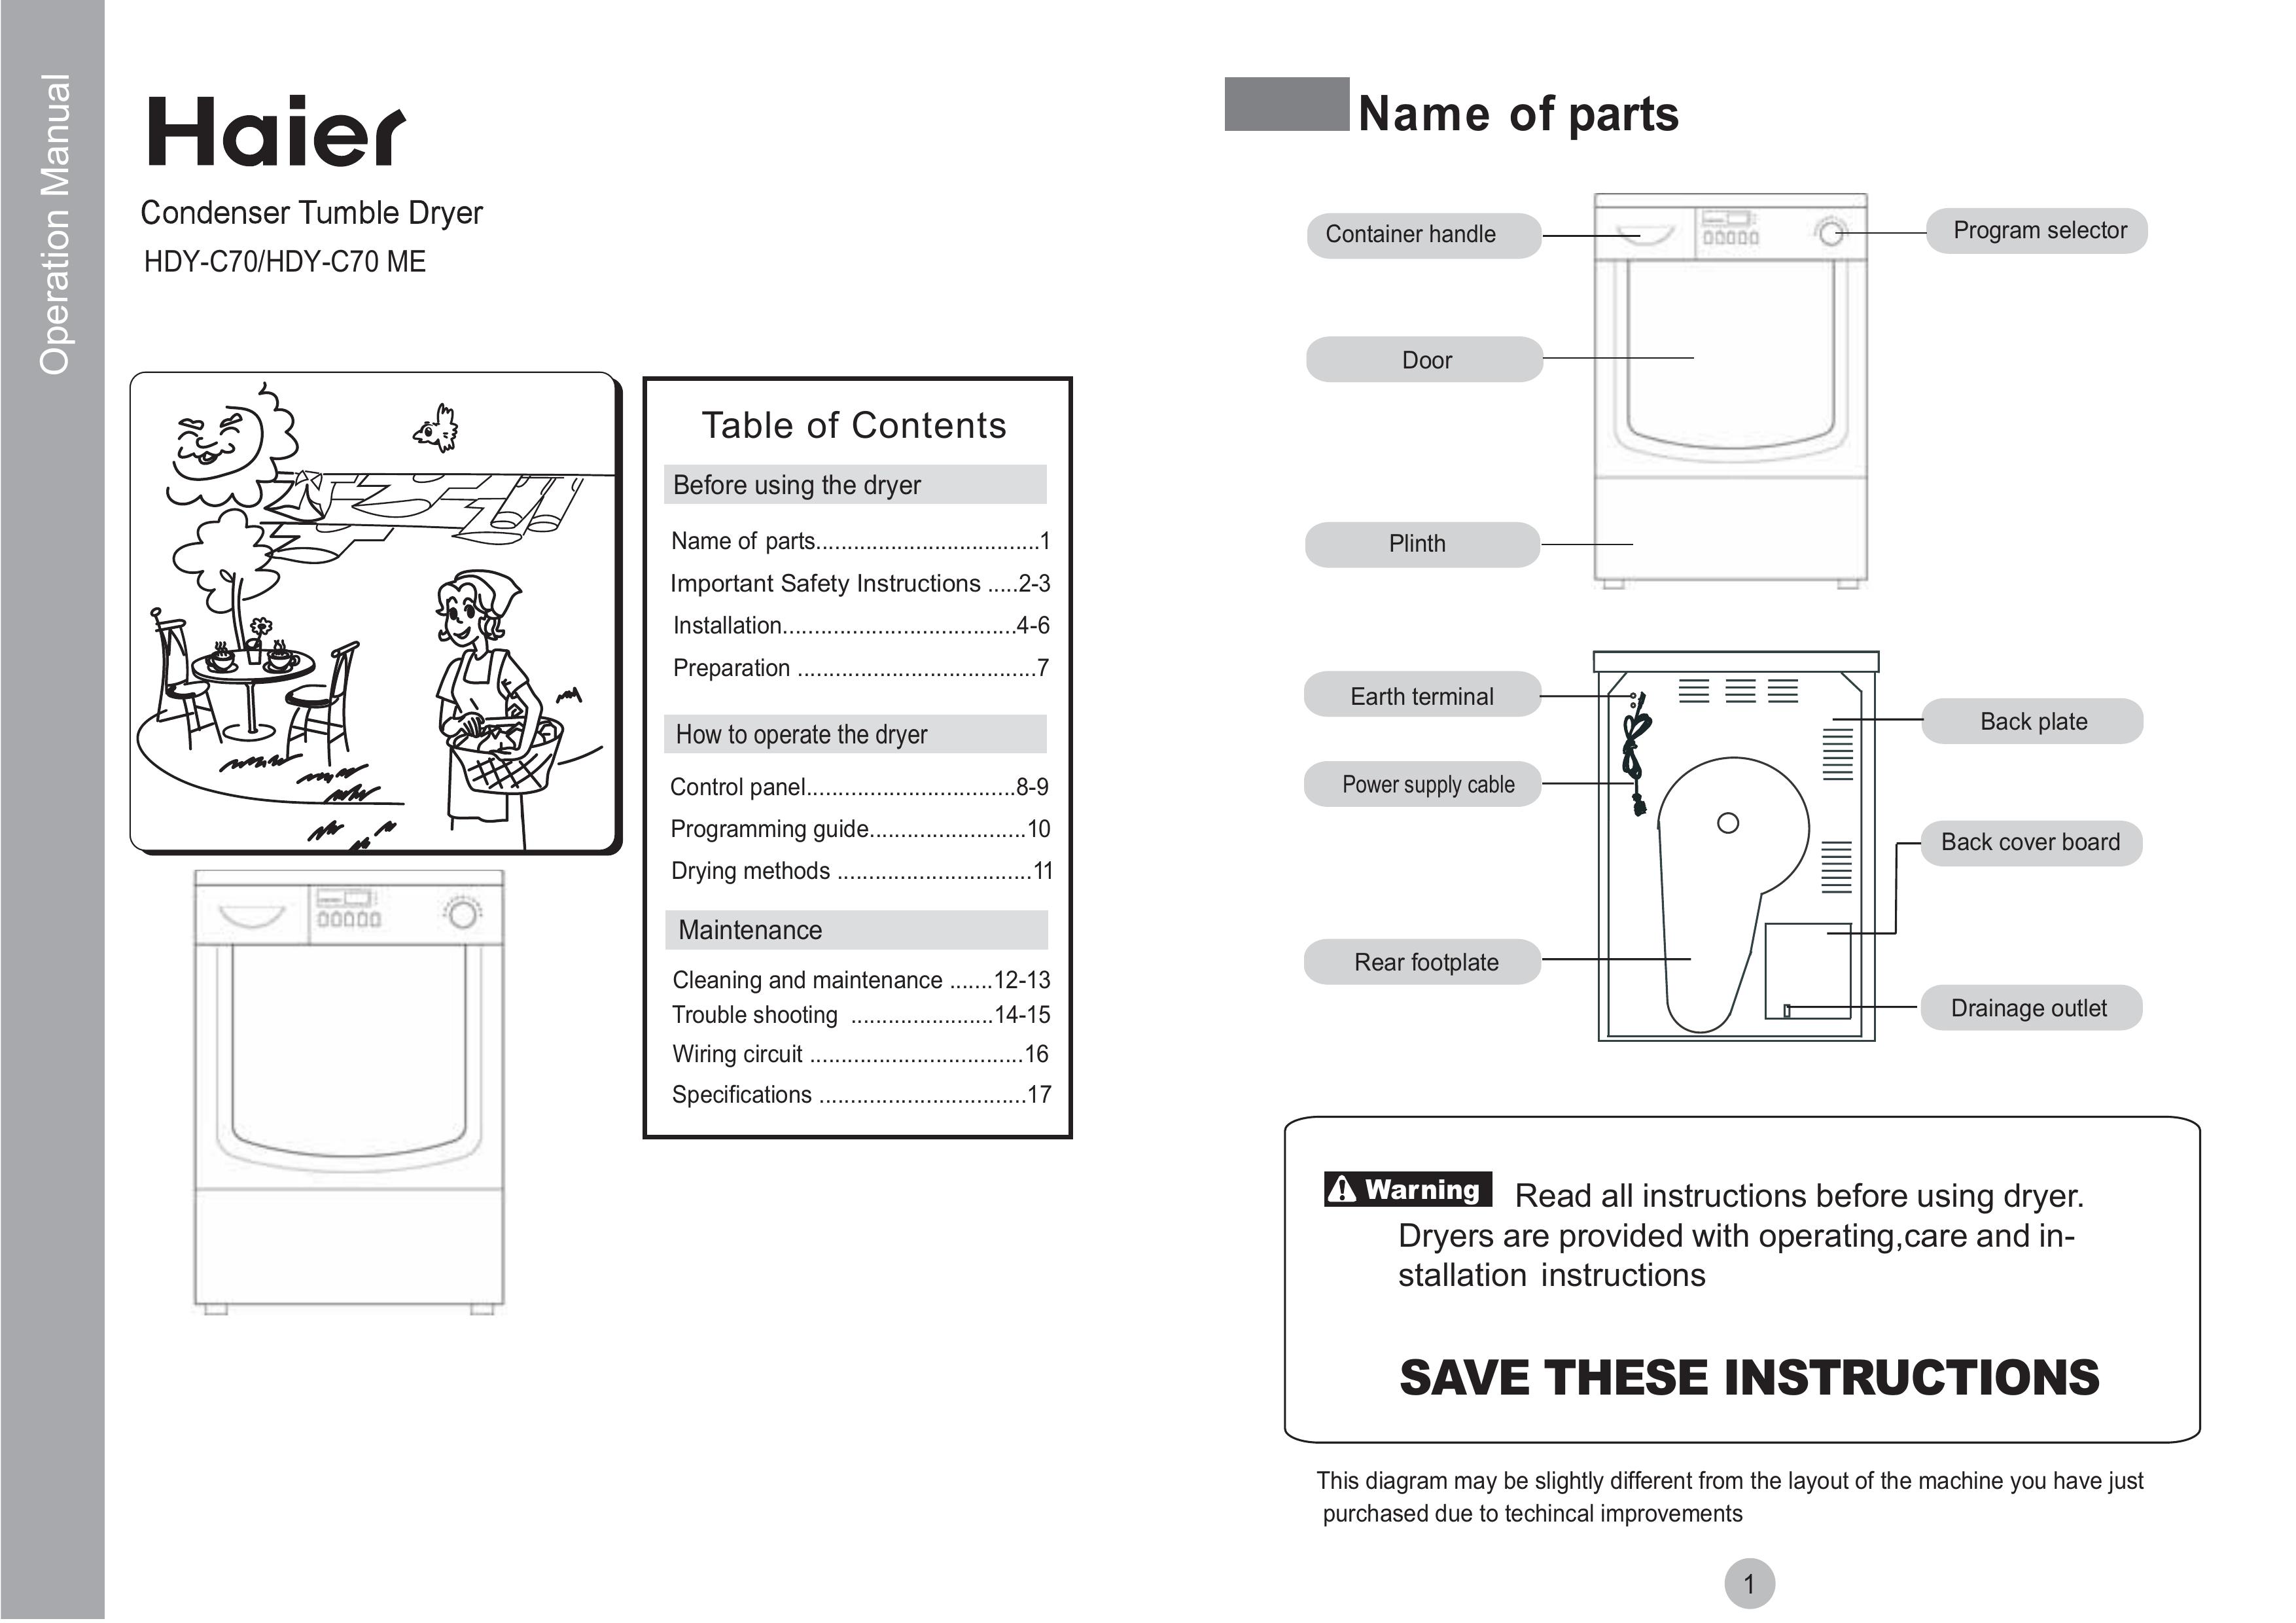 Haier HDY-C70 ME Clothes Dryer User Manual